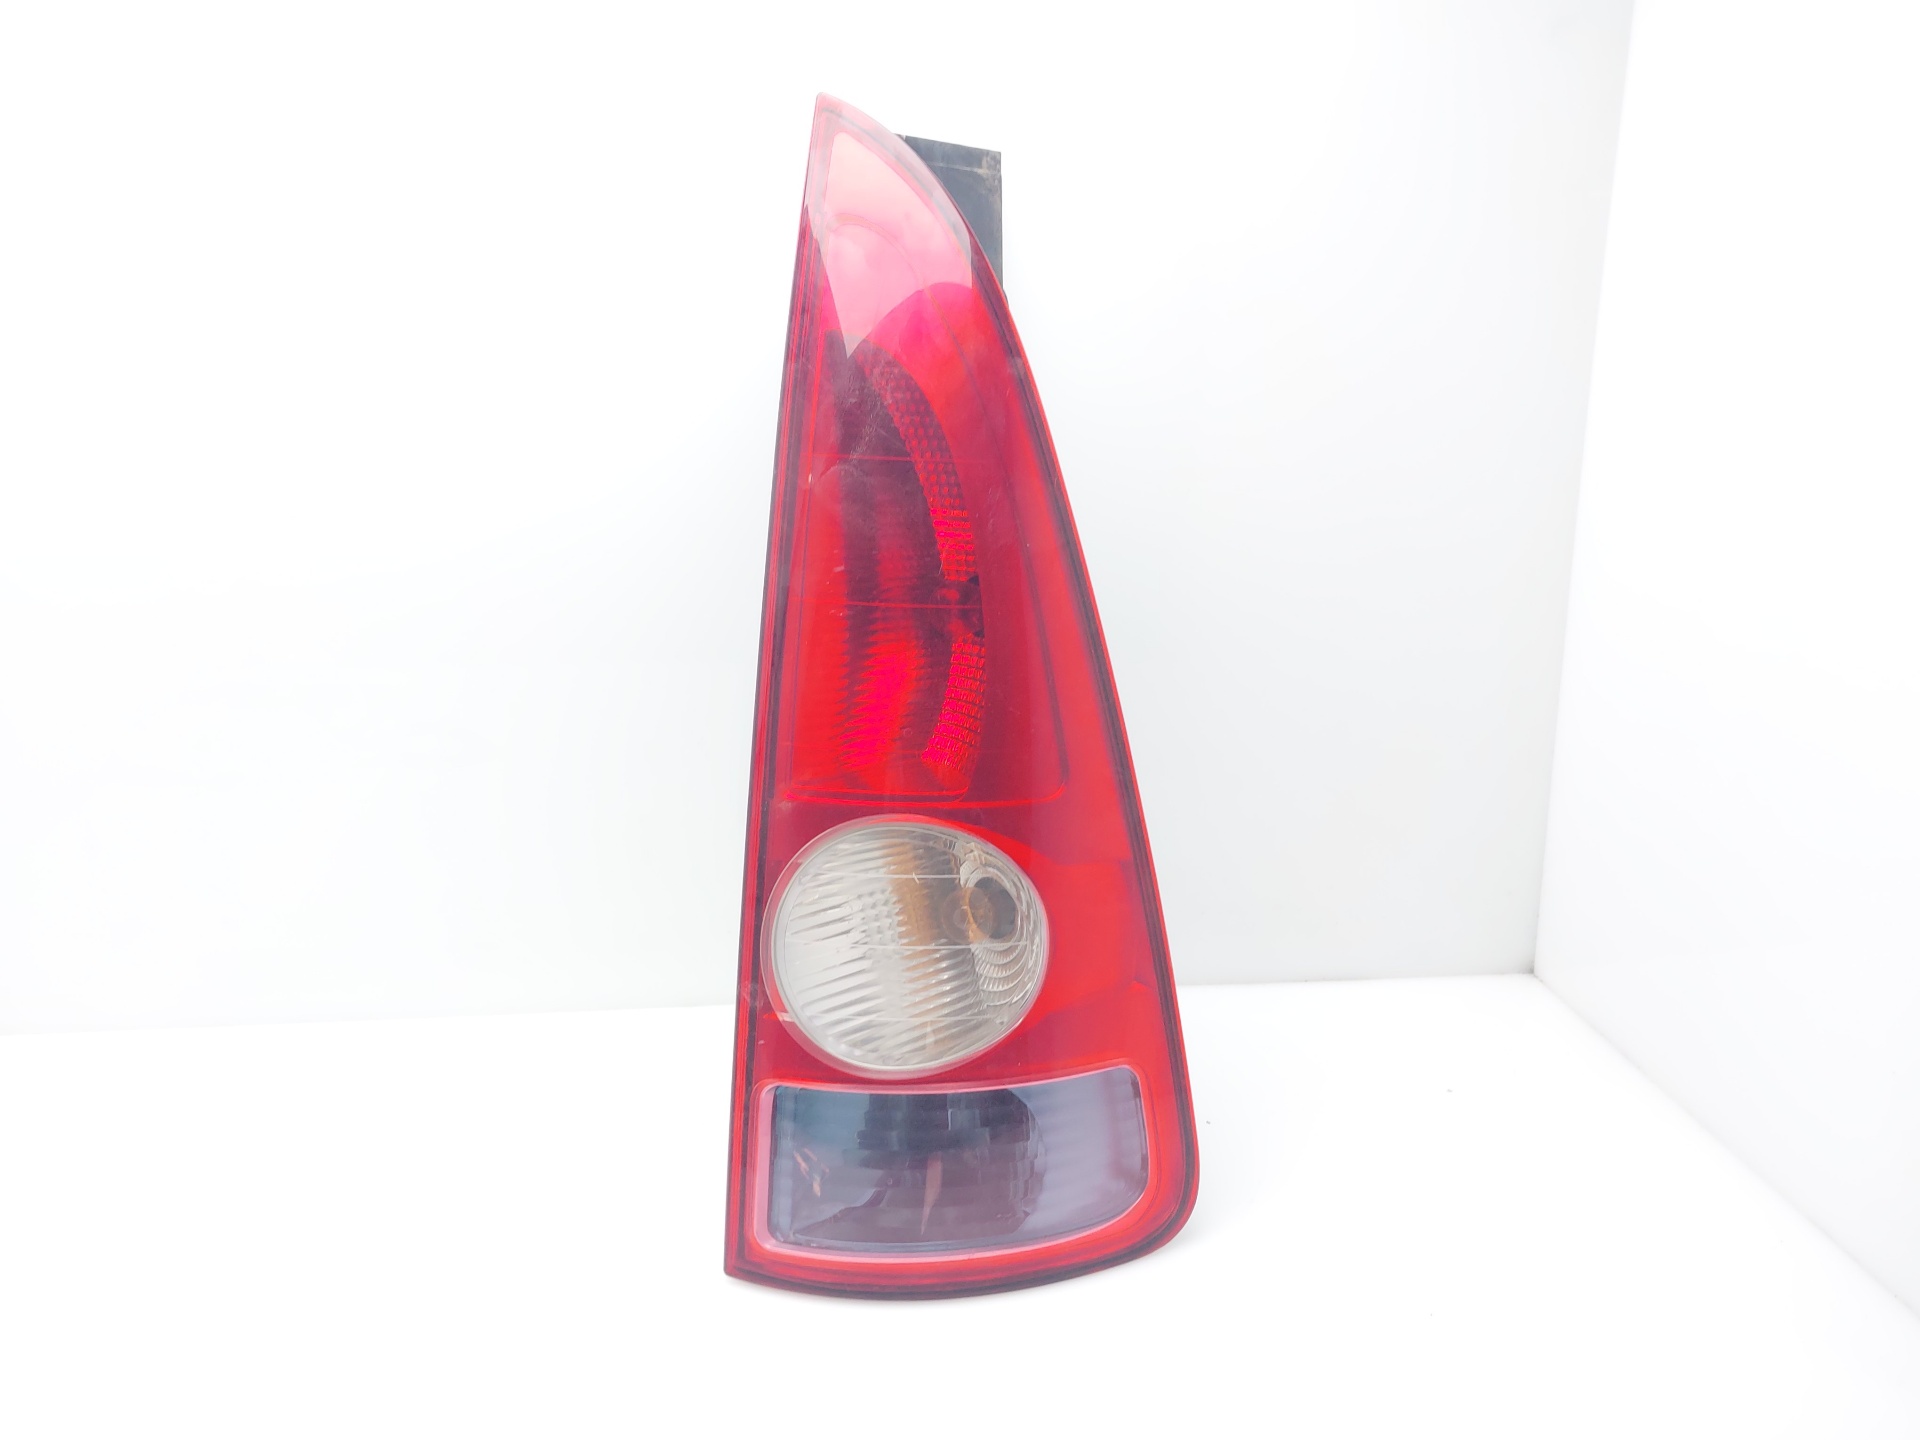 RENAULT Espace 4 generation (2002-2014) Rear Right Taillight Lamp 8200027152 22570929